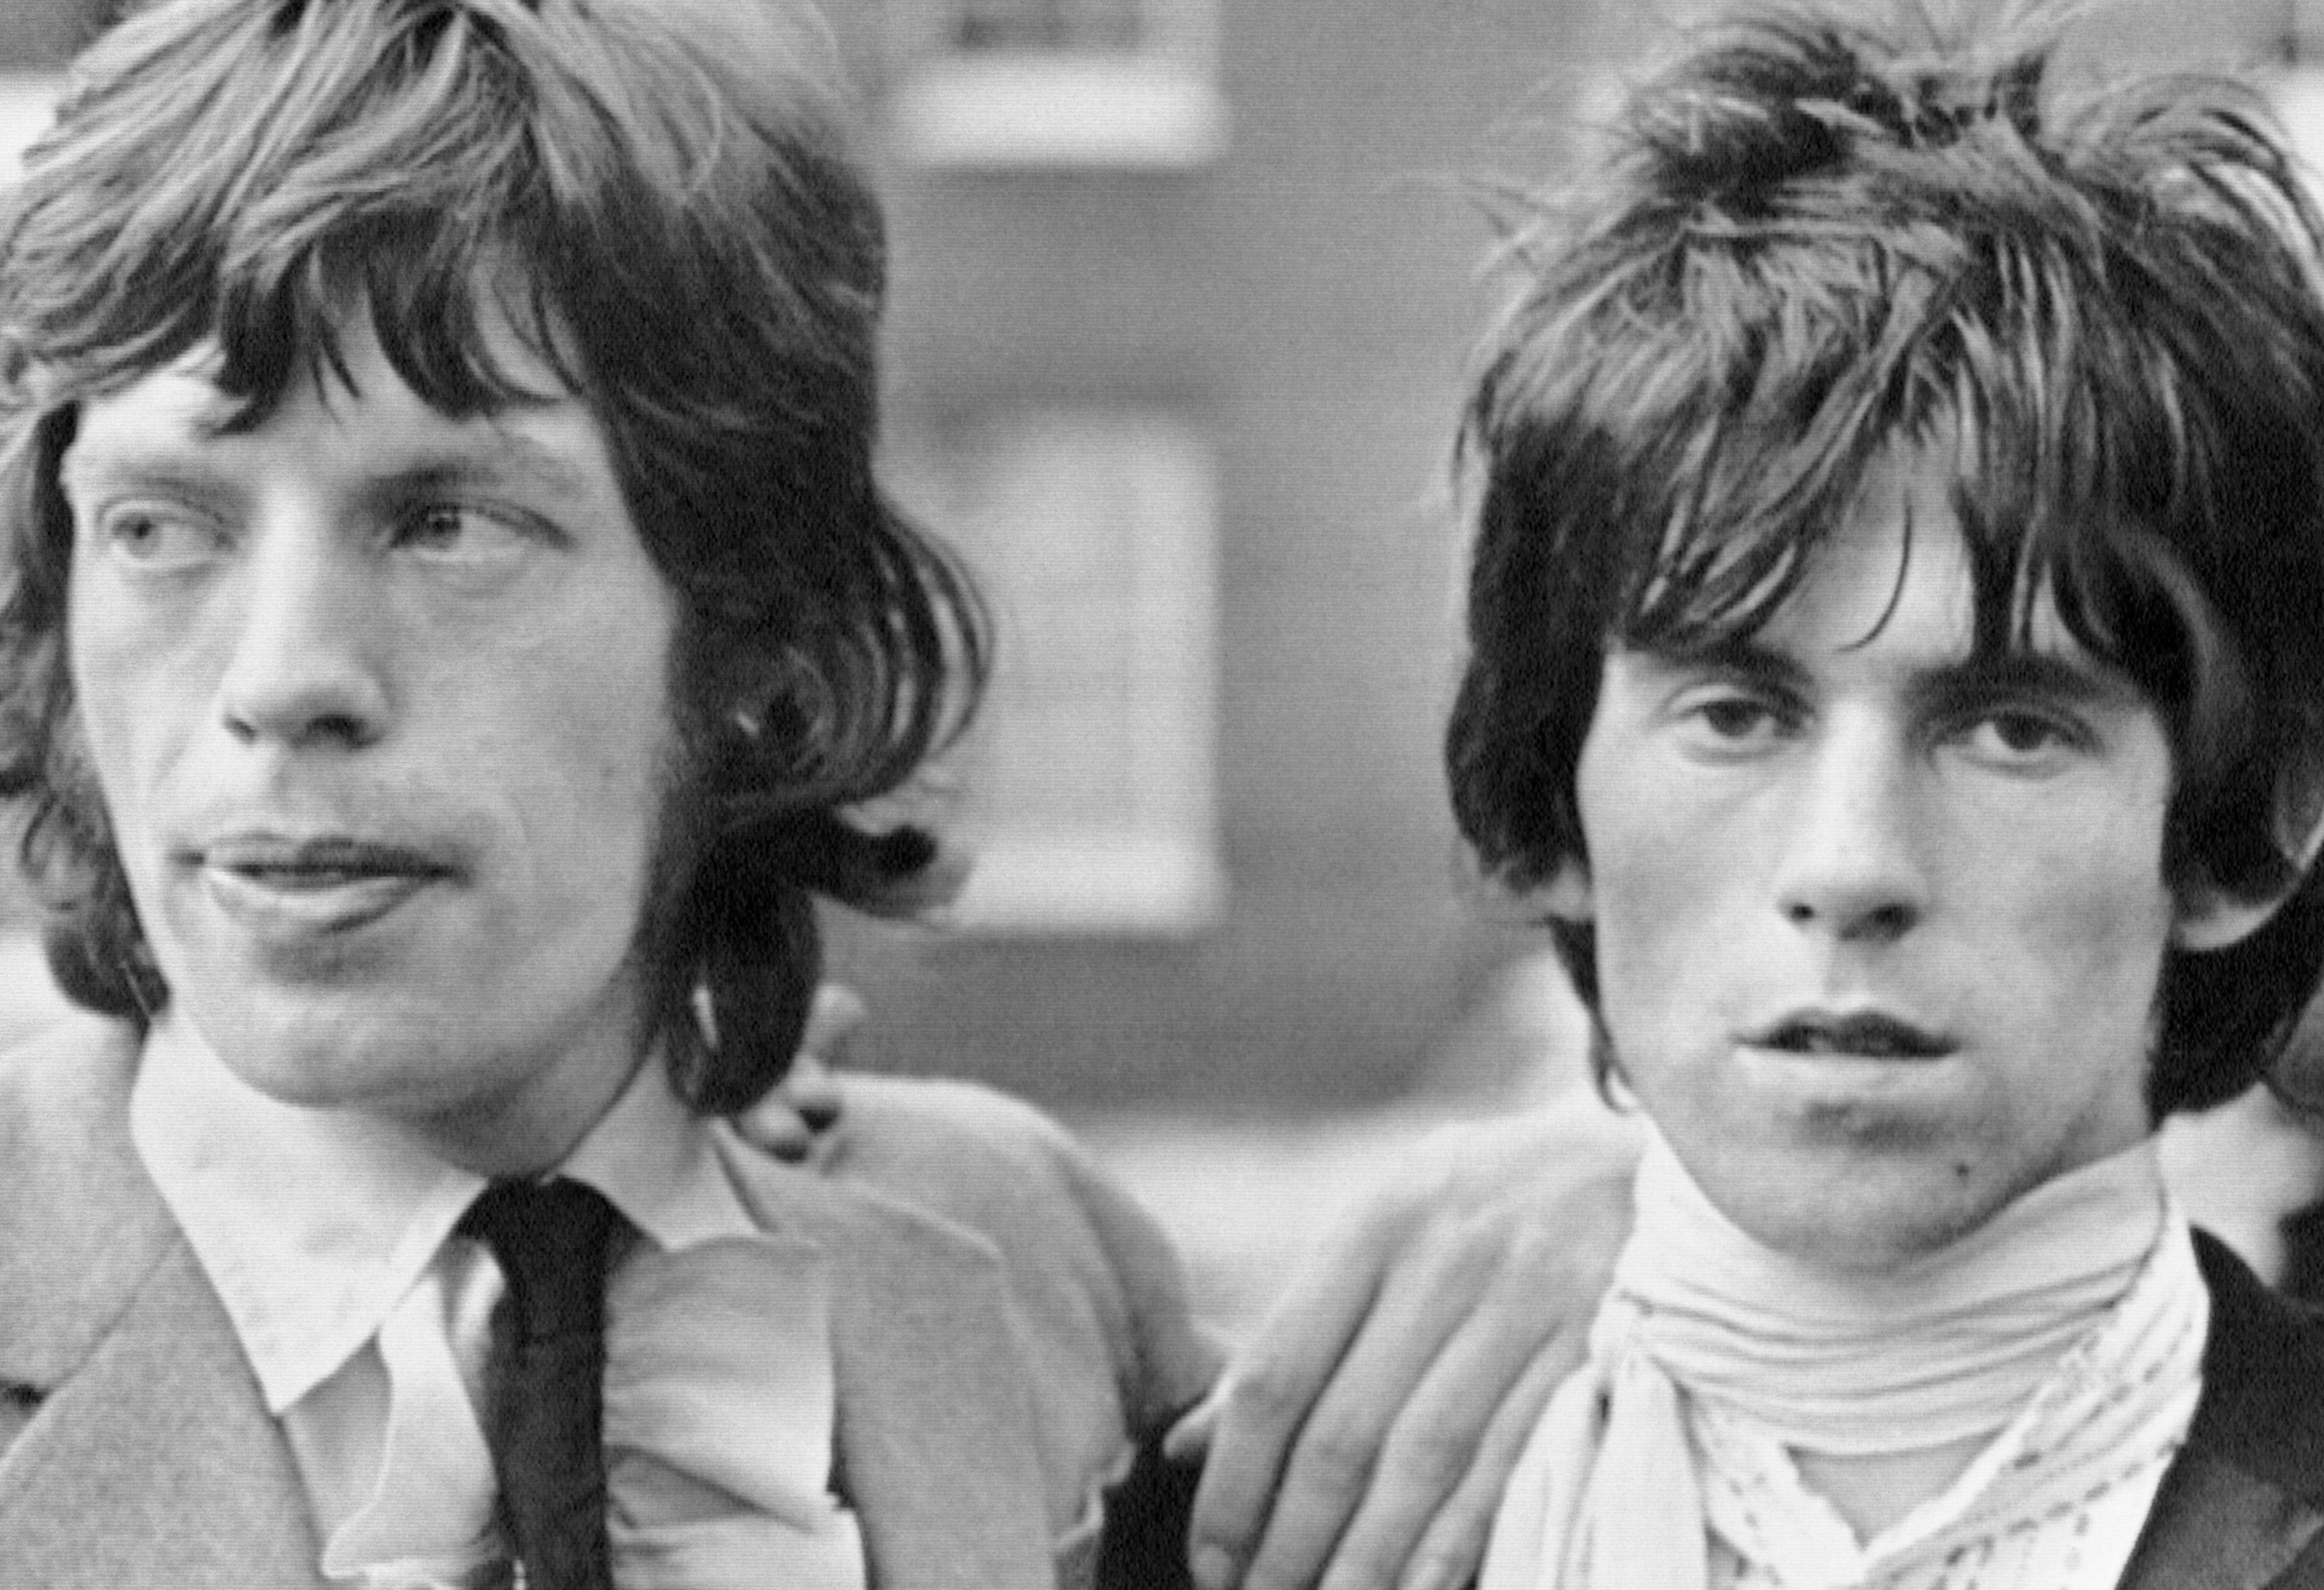 The Rolling Stones' Mick Jagger with his hand on Keith Richards' shoulder